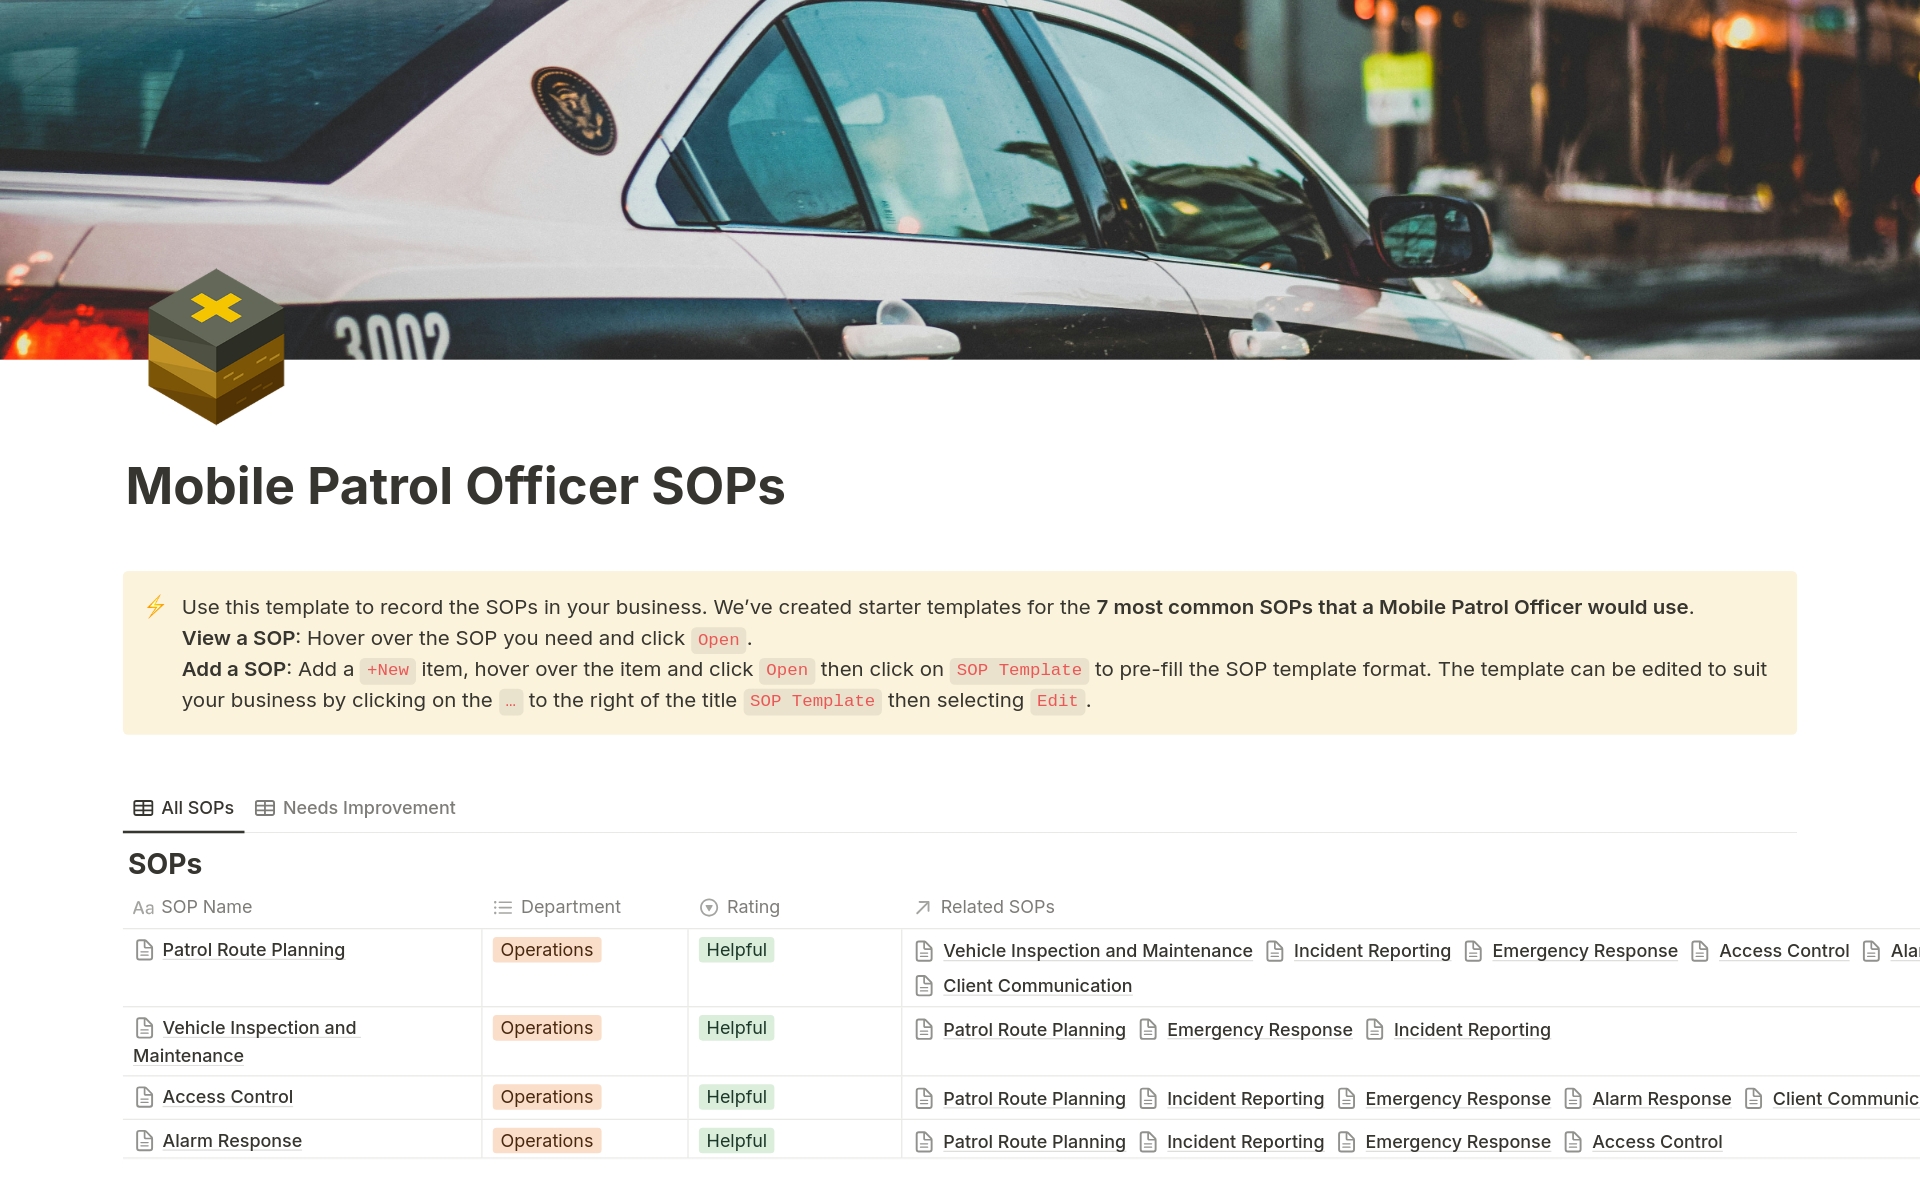 These Standard Operating Procedures (SOPs) have been created for Mobile Patrol Officers. Save 10 hours of research.